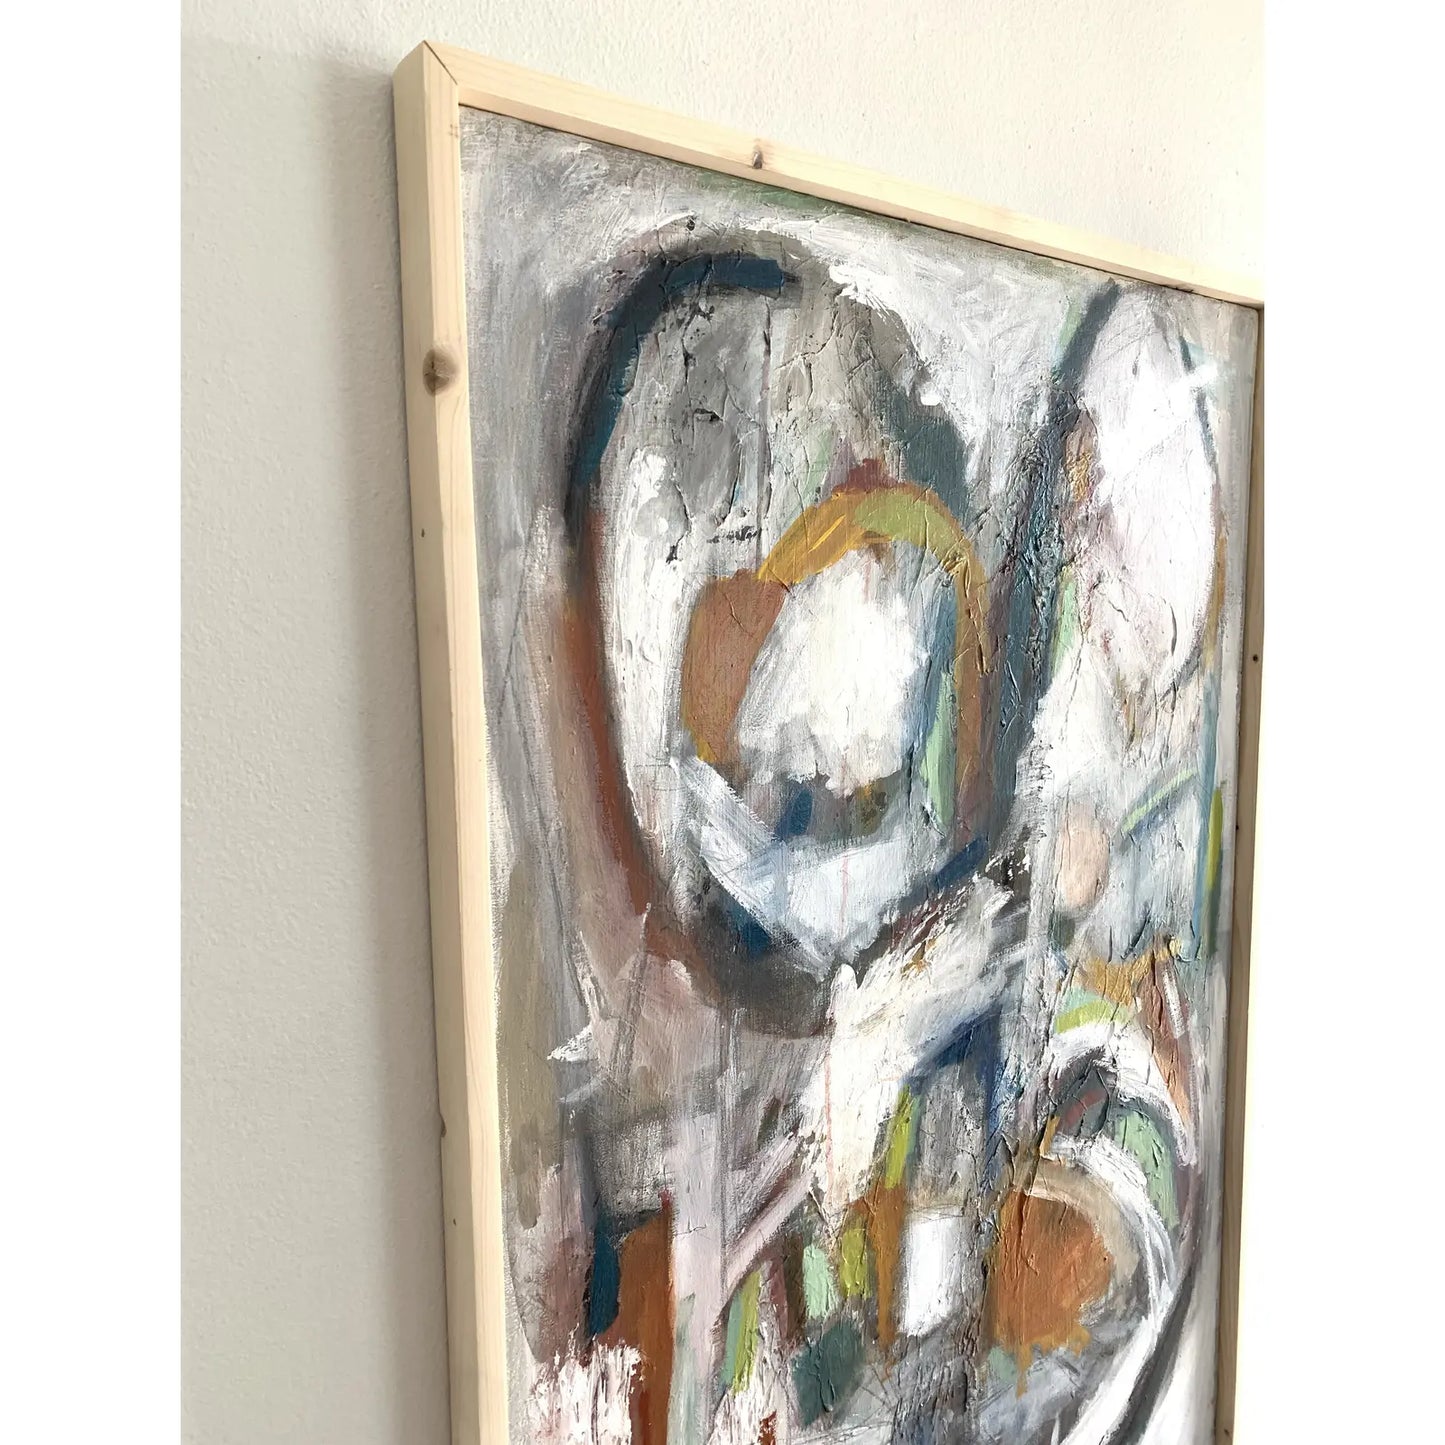 Framed Contemporary Original Modern Abstract Acrylic Painting on Canvas